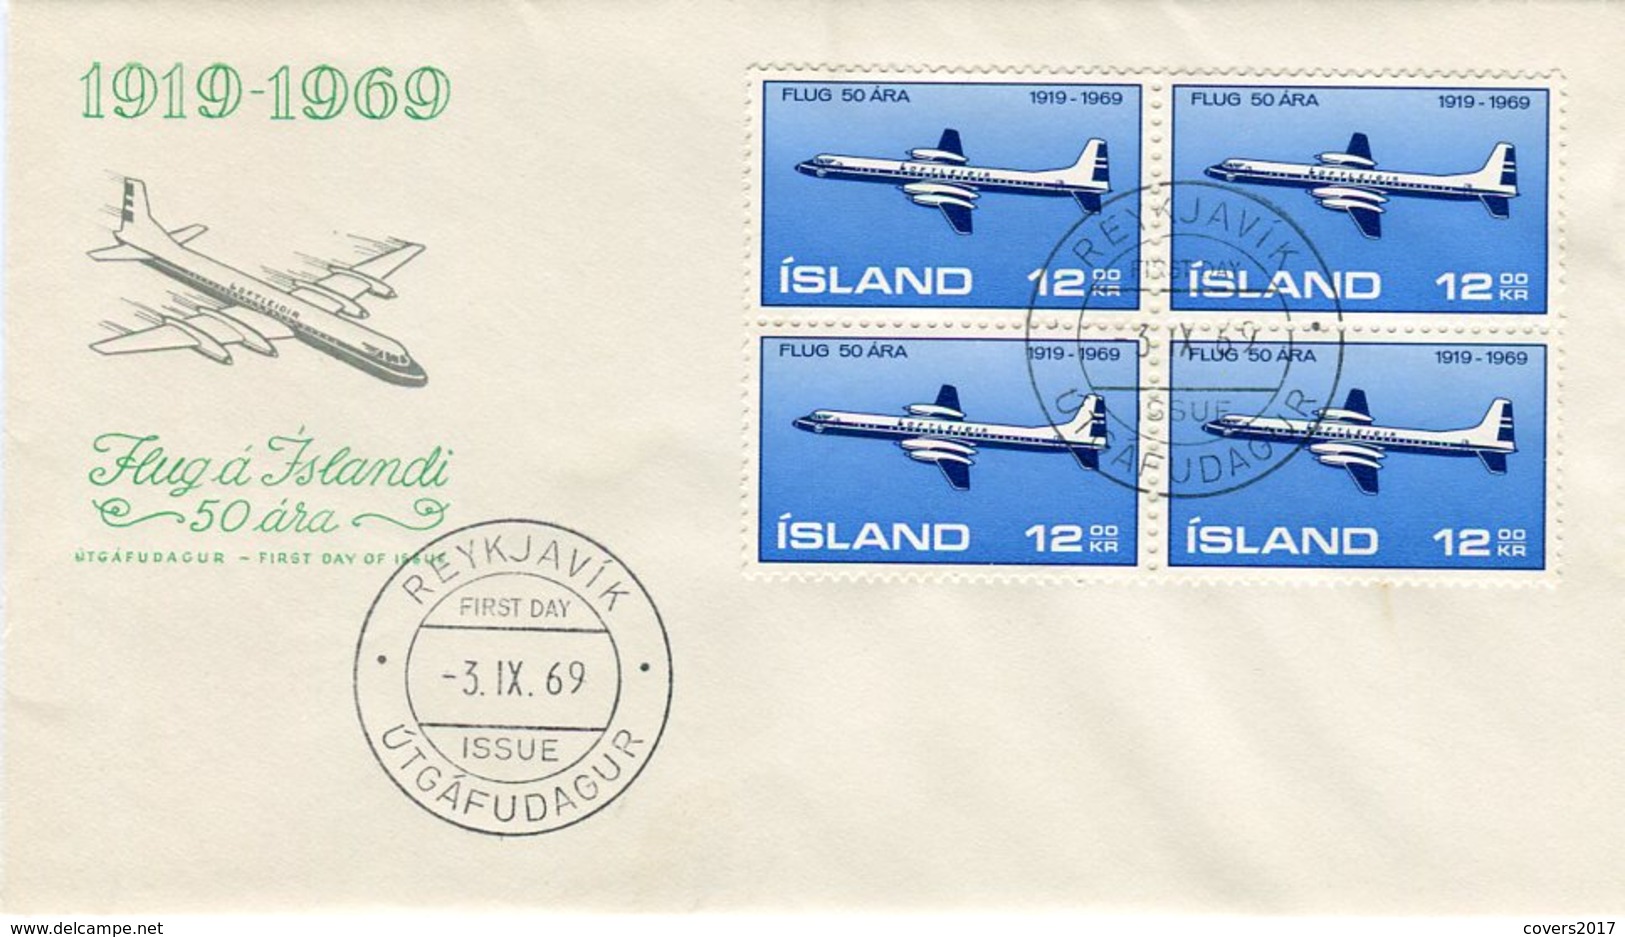 Iceland/Islande/Ijsland/Island FDC 3.IX.1969 Flight For 50 Years Block Of 4 Matching Cover - FDC